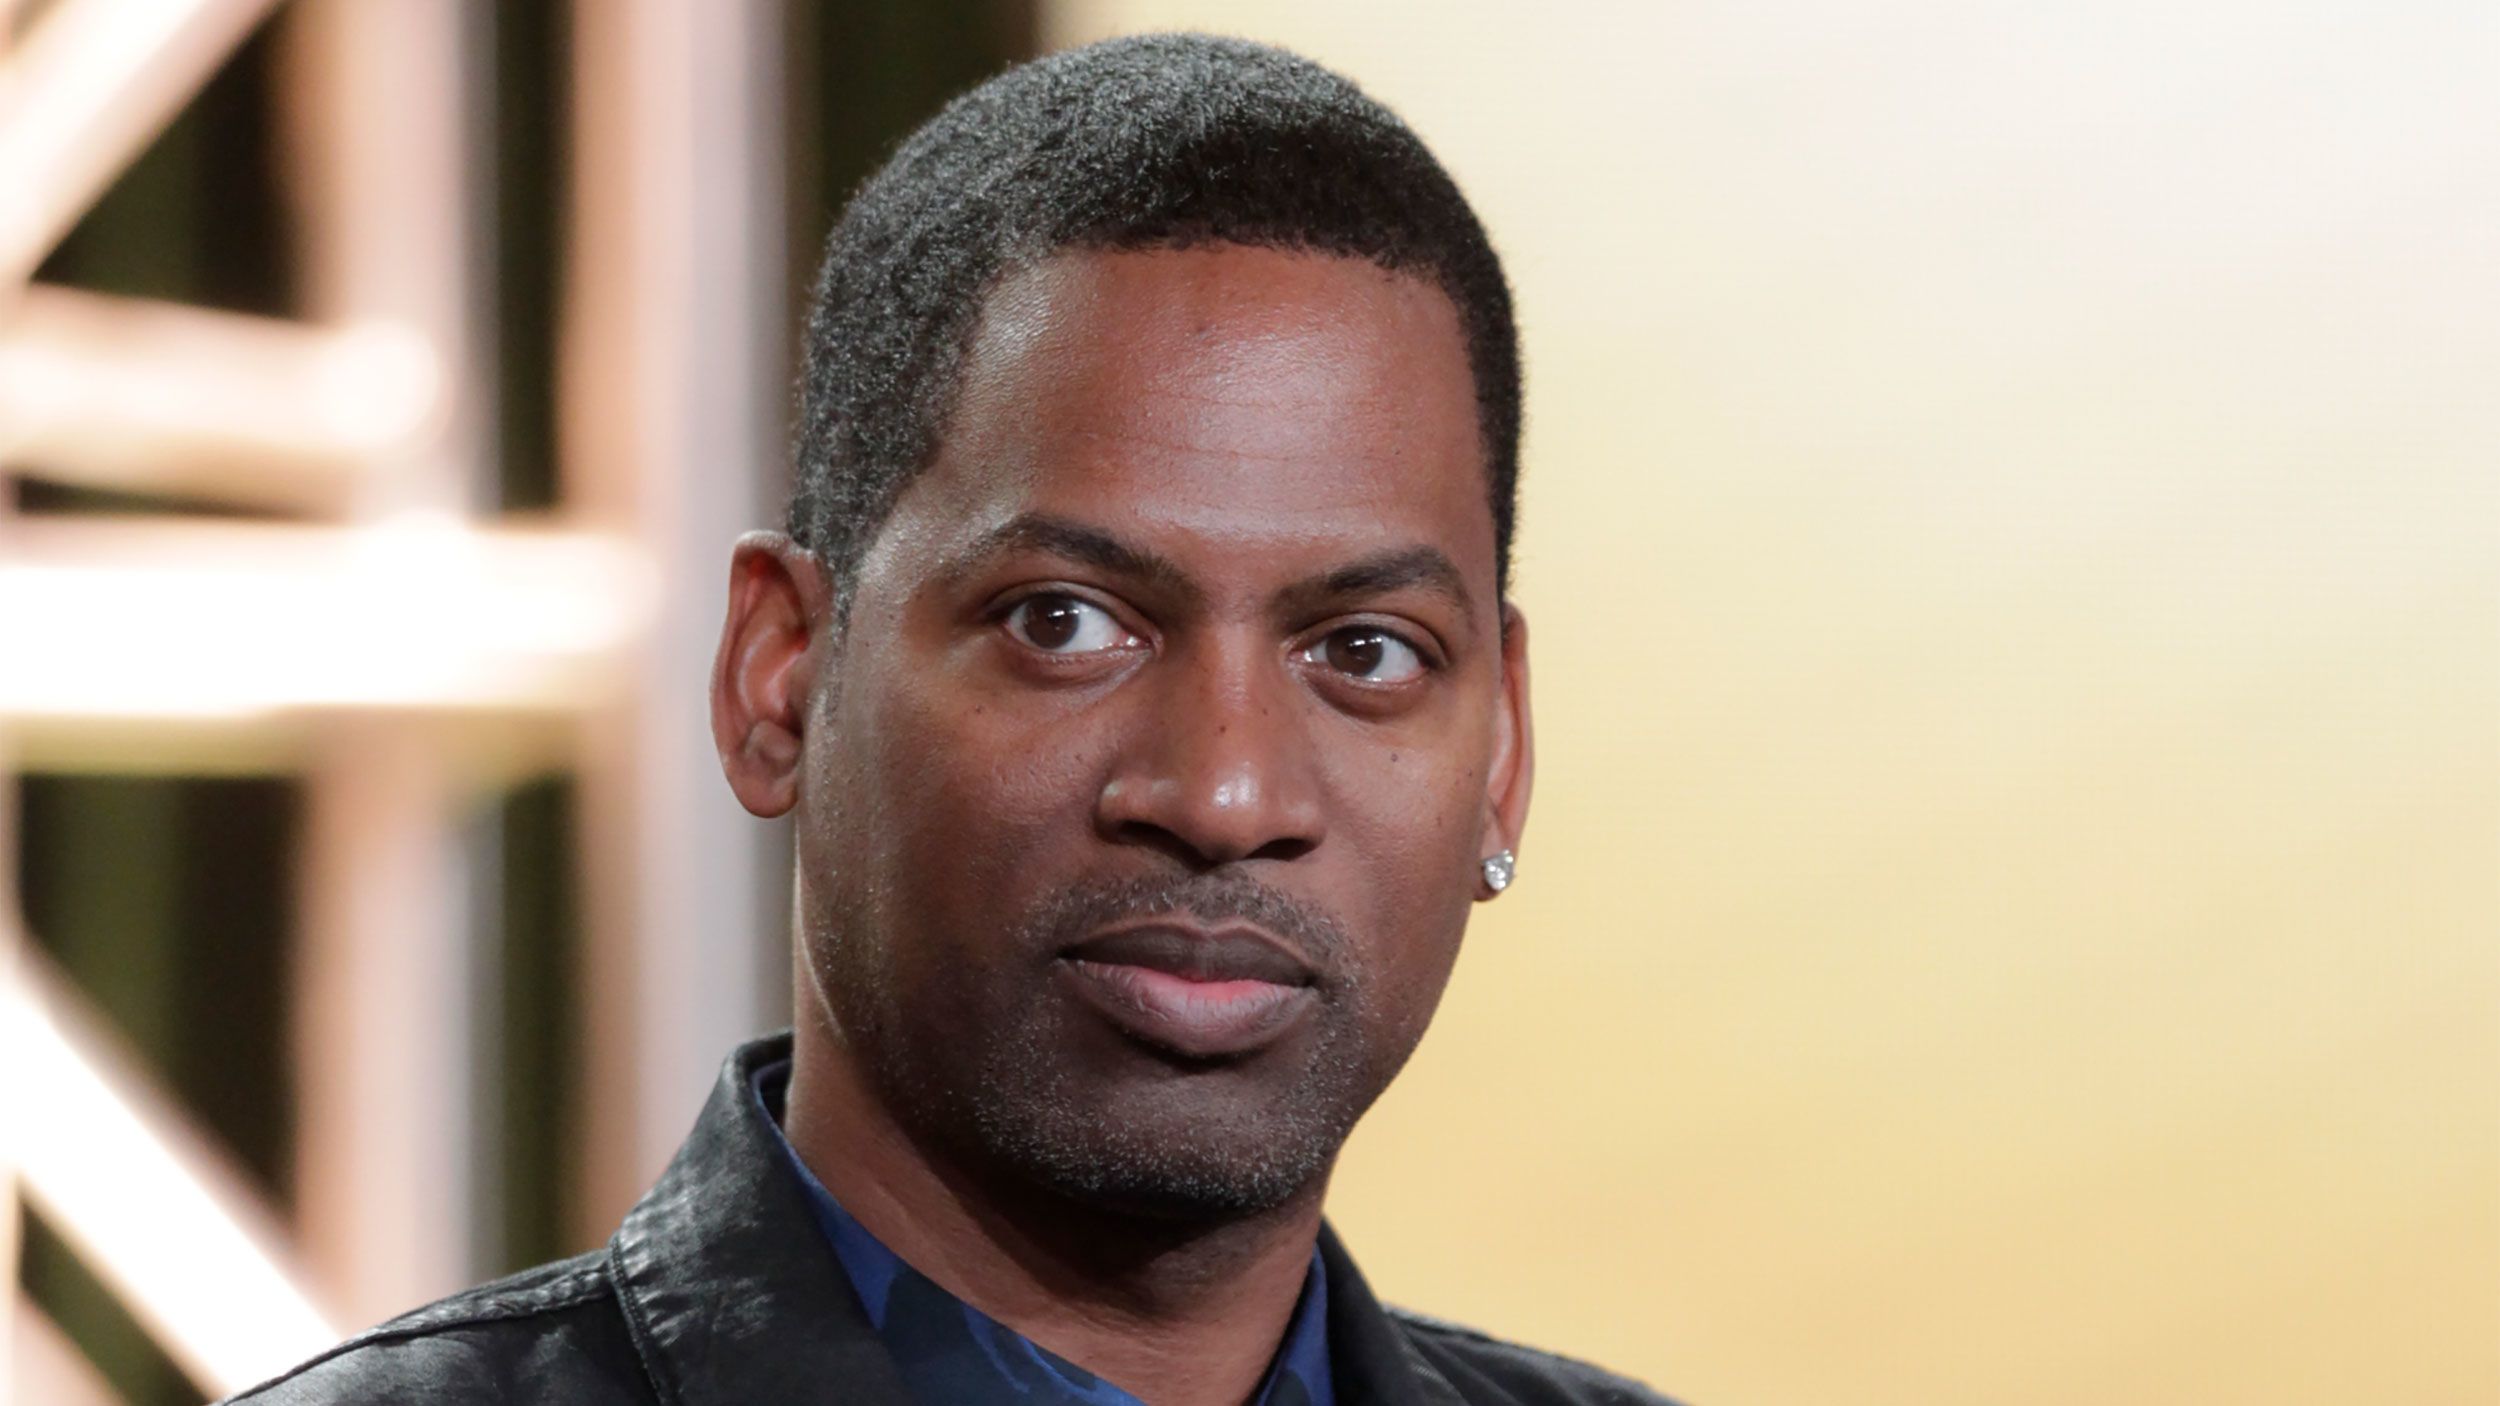 Chris Rock's brother Tony does not approve of Will Smith's apology | CNN